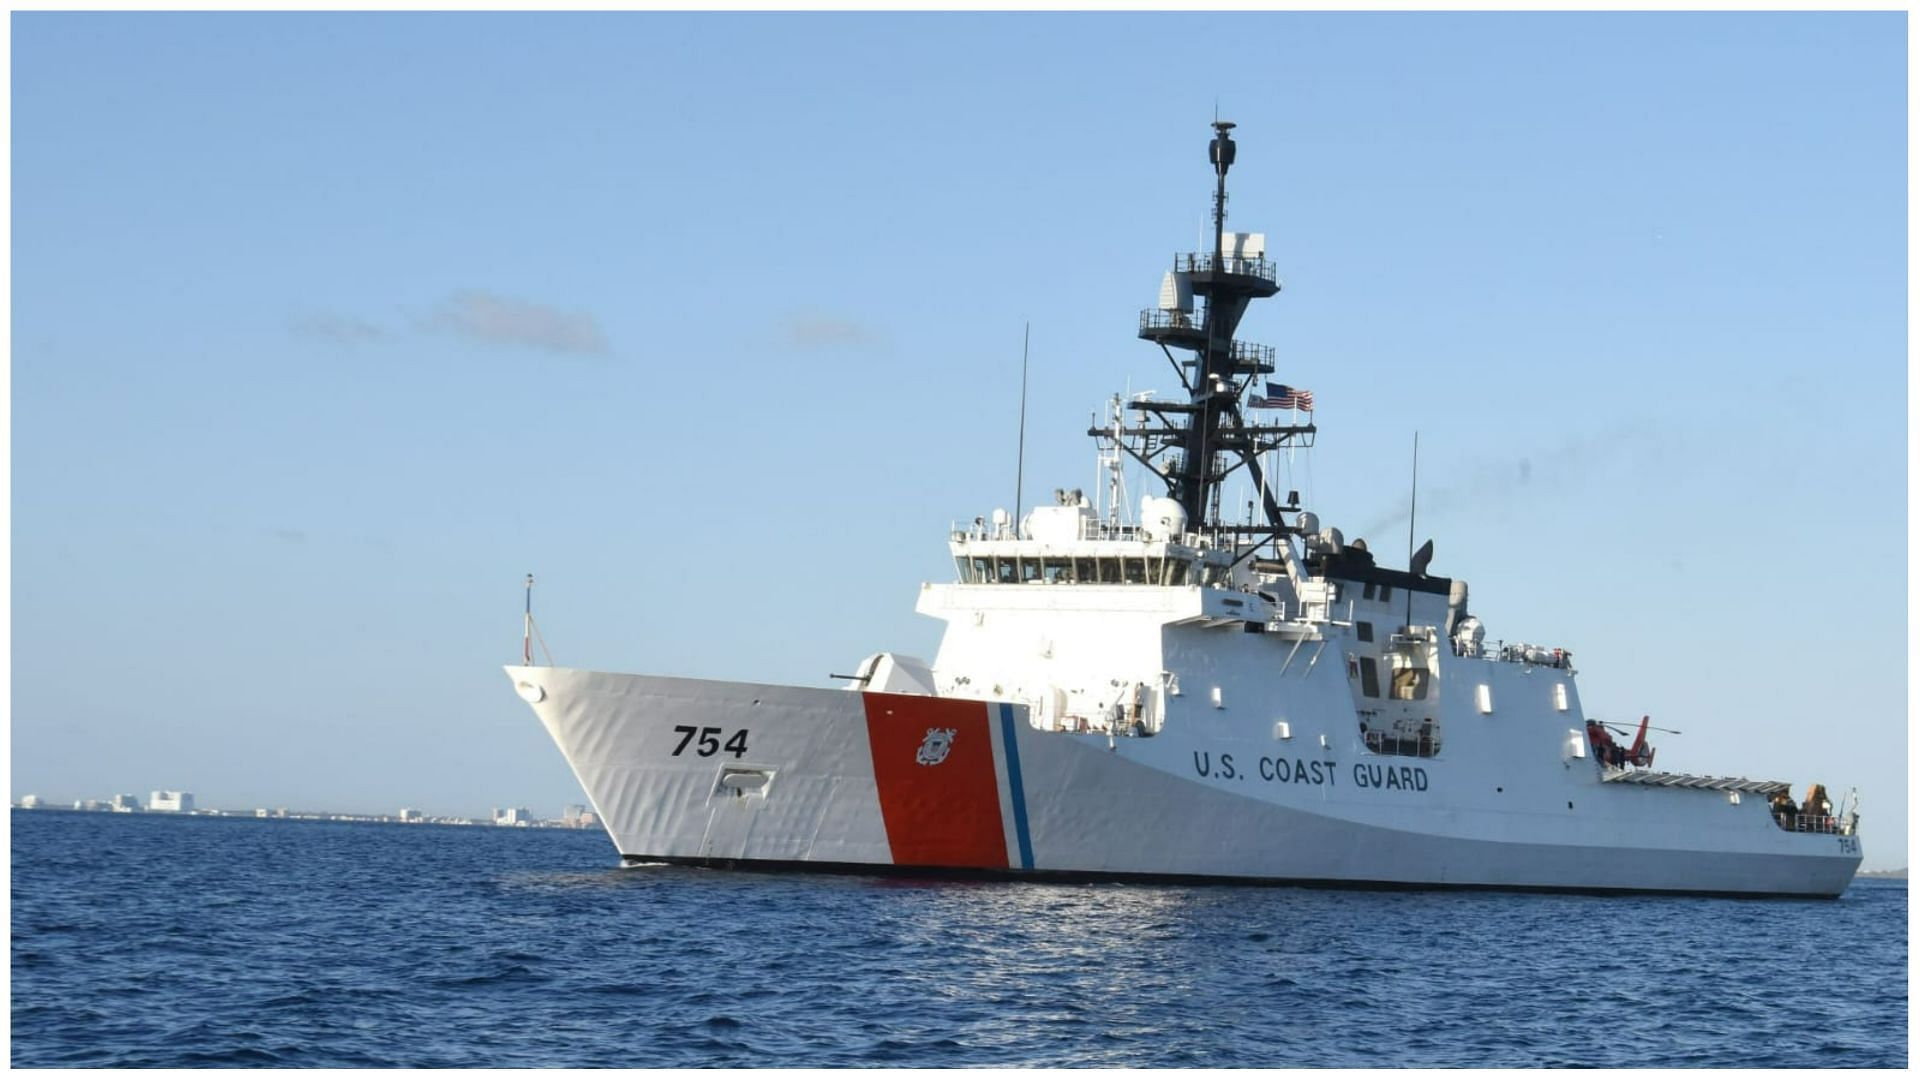 Coast Guard search for survivors of the tragedy (Image via US Coast Guard/Twitter)